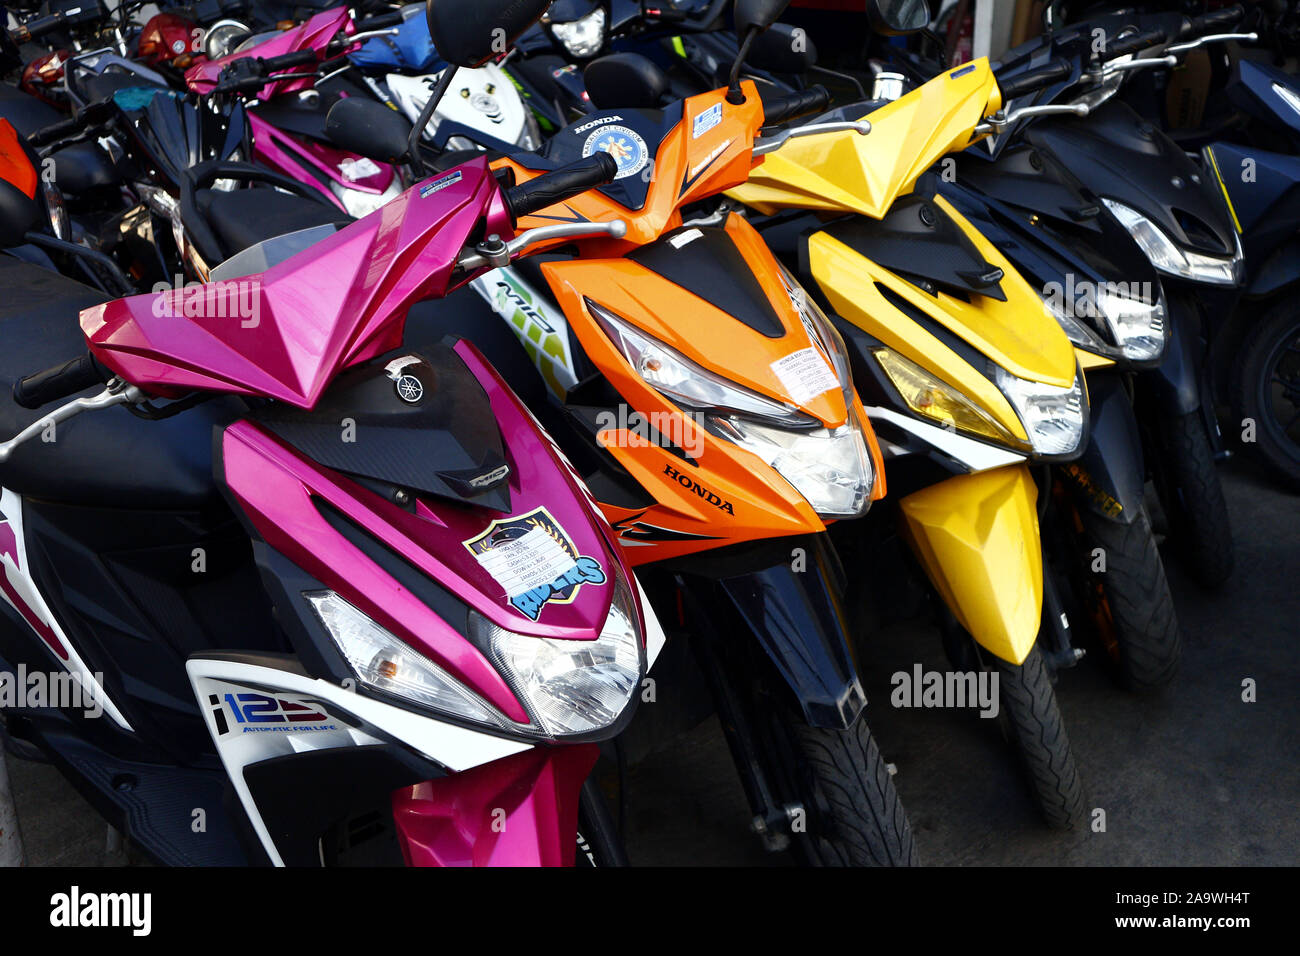 Display Of Motor Scooters High Resolution Stock Photography And Images Alamy